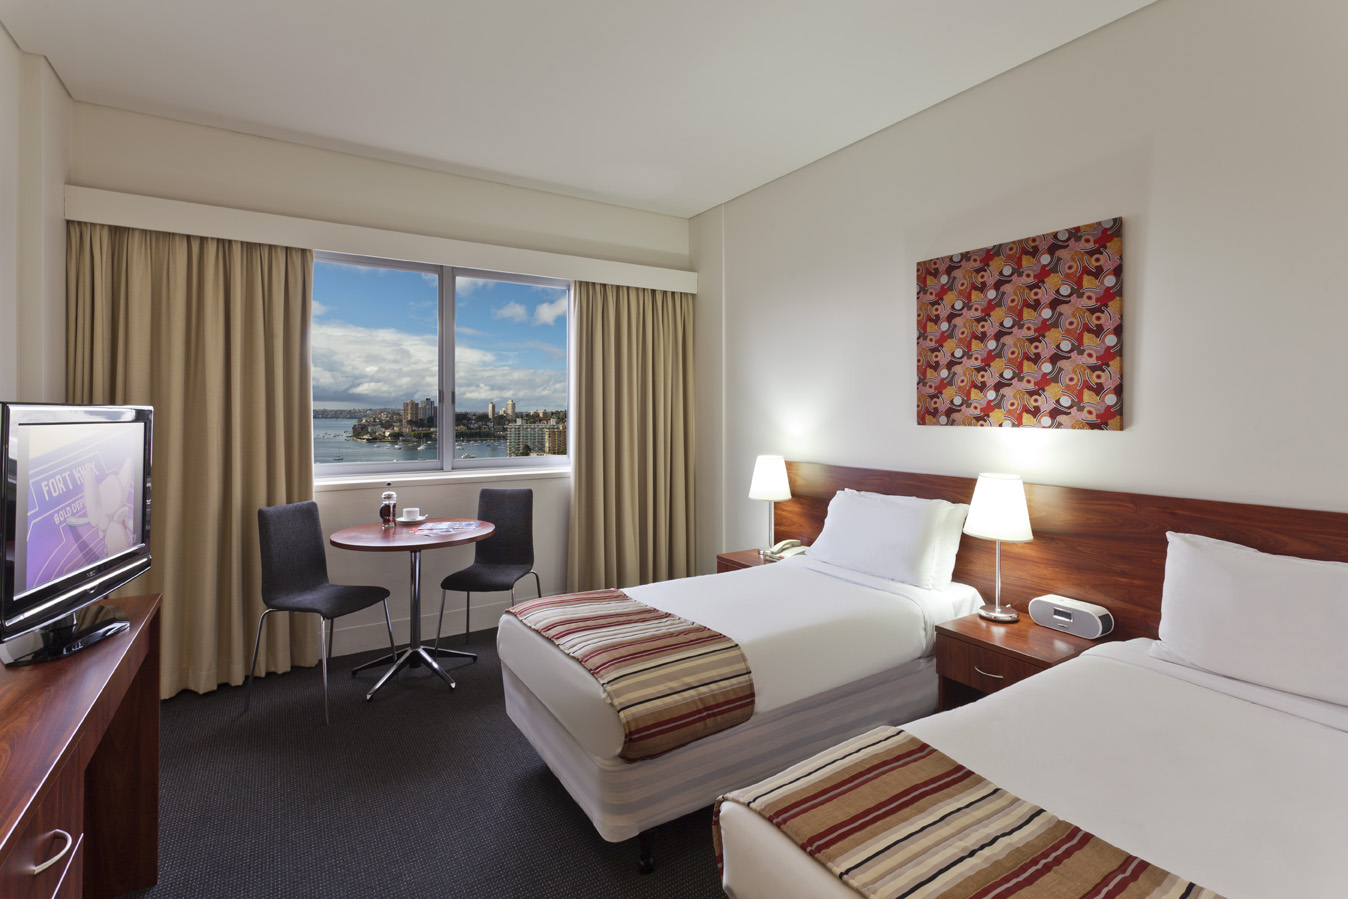 Twin Studio Room at The Macleay Hotel in Potts Point